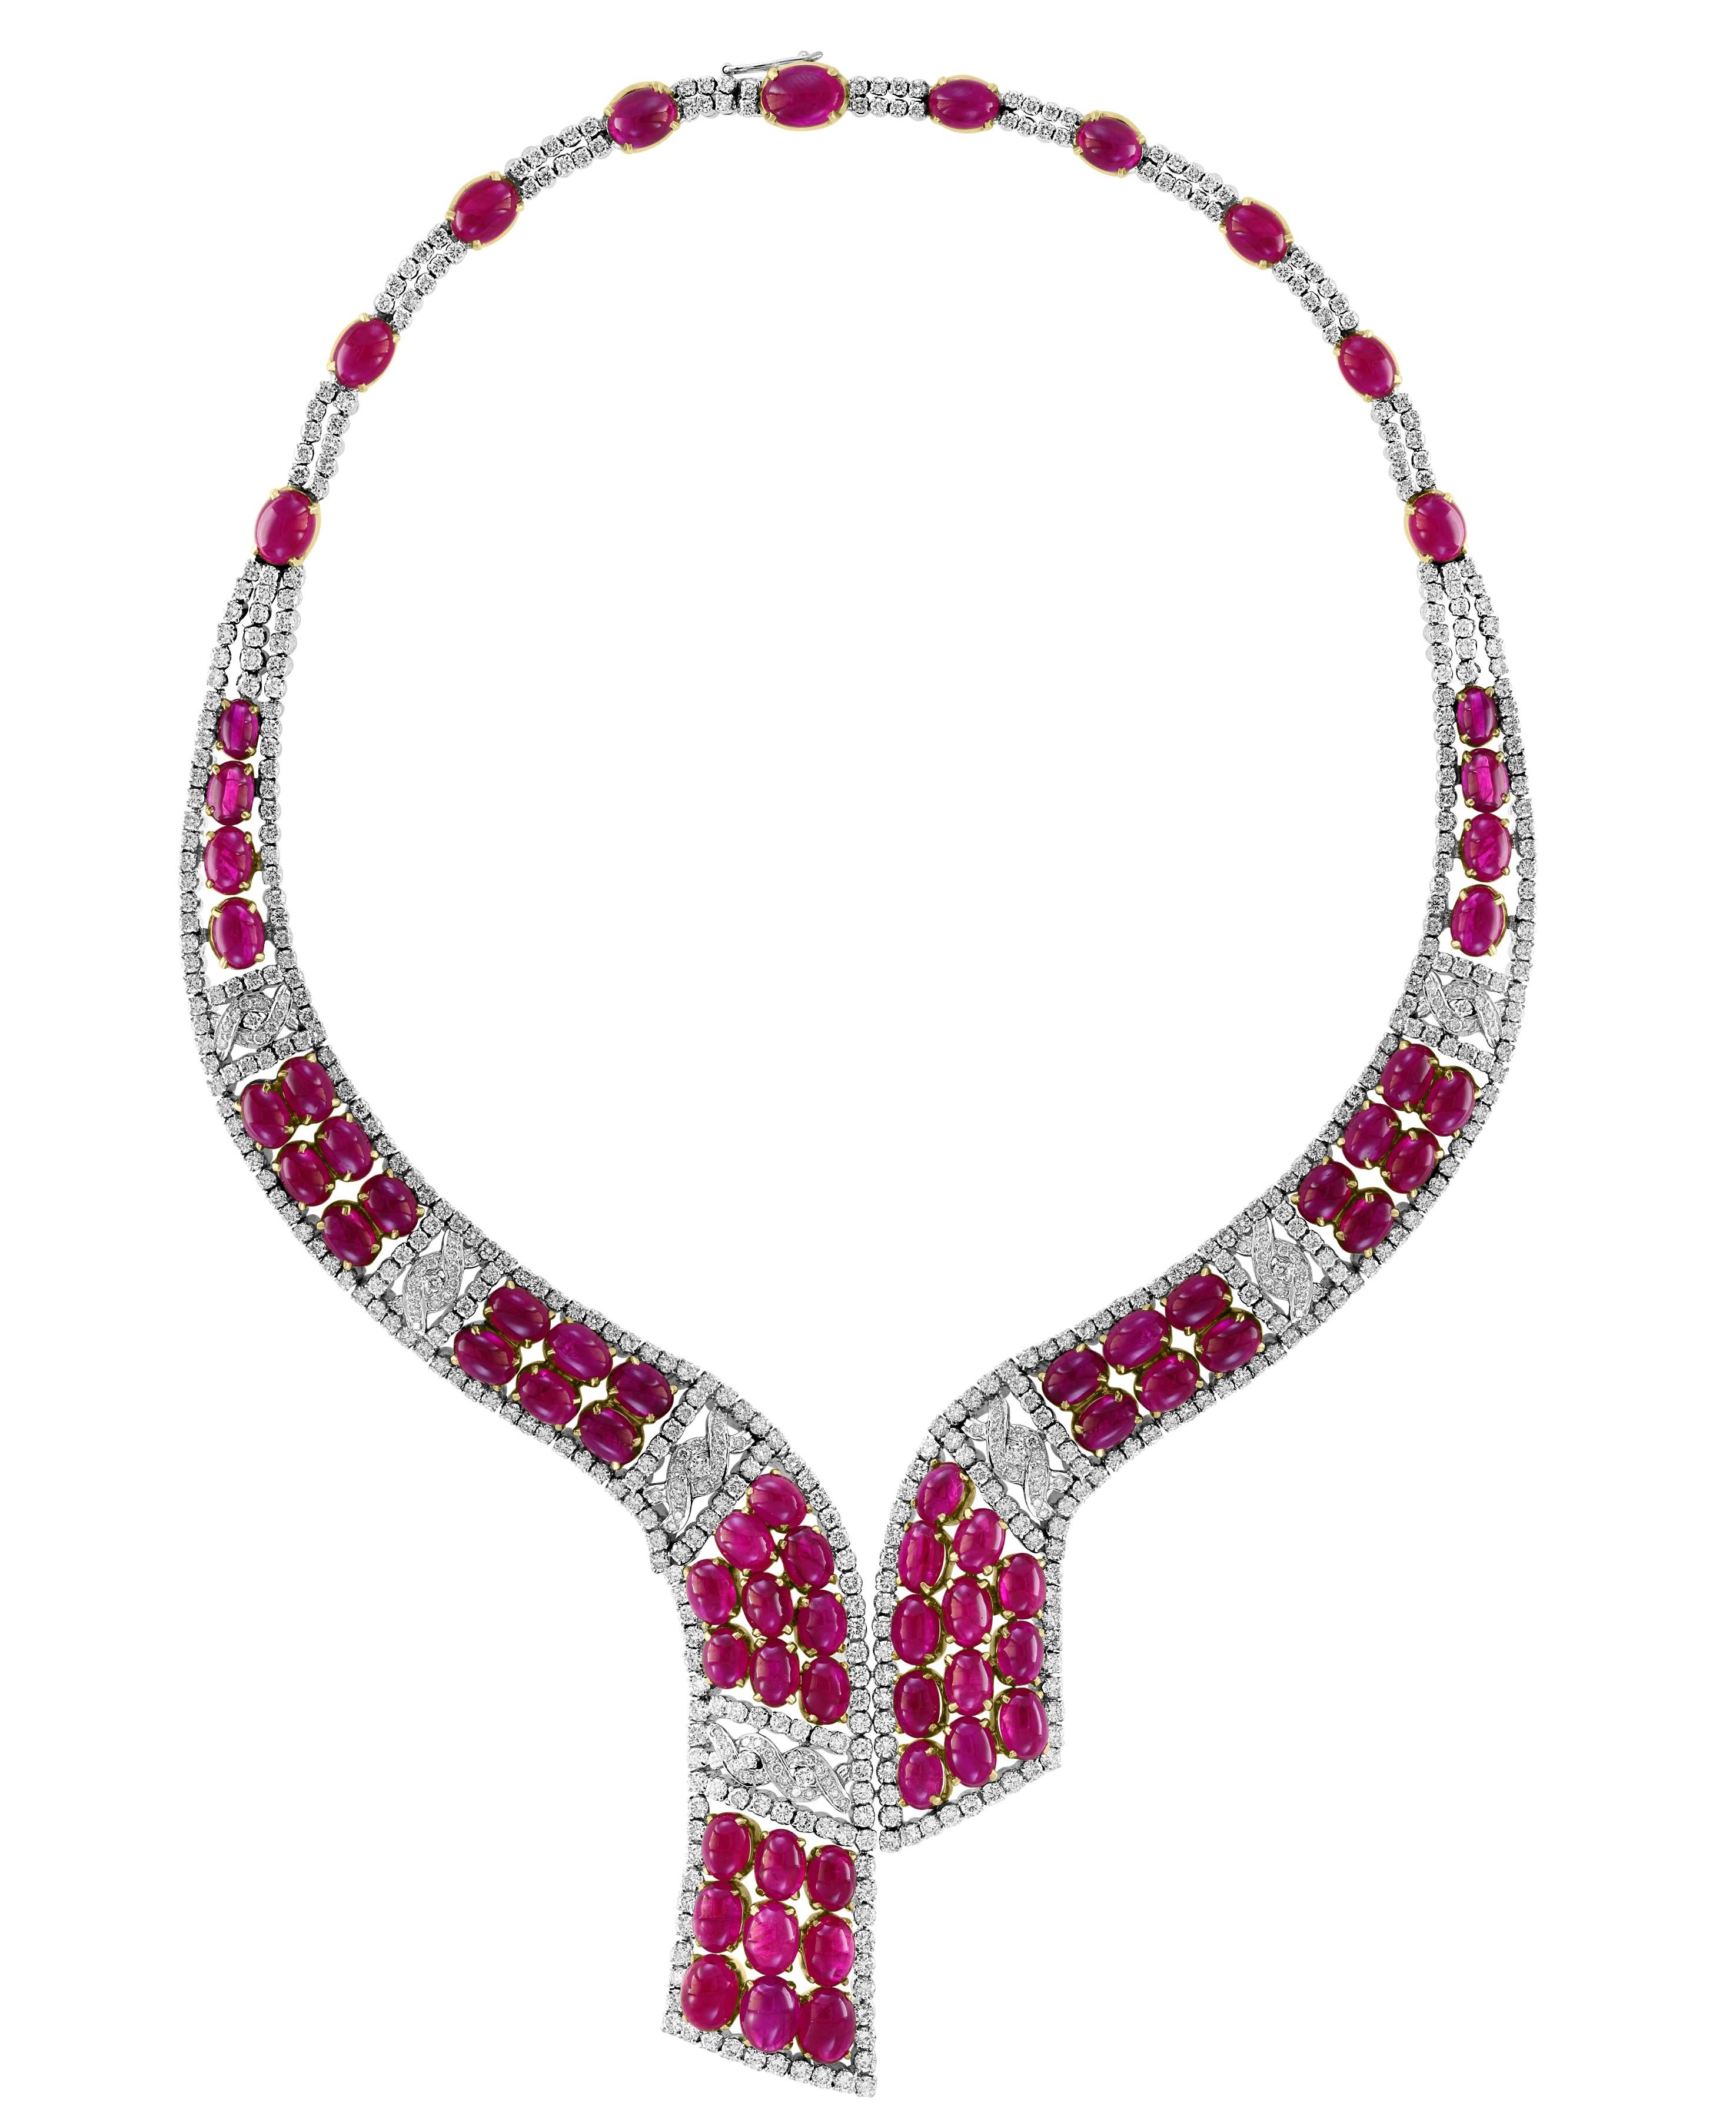 
GIA Certified 112 Ct Burma Ruby Cabochon & 25 Carat Diamond Necklace Suite 18 Karat Yellow gold 
This bridal suite made out of 18 Karat gold .Necklace consisting of oval shape natural Burma Ruby cabochon having a total weight of 112 carats set with